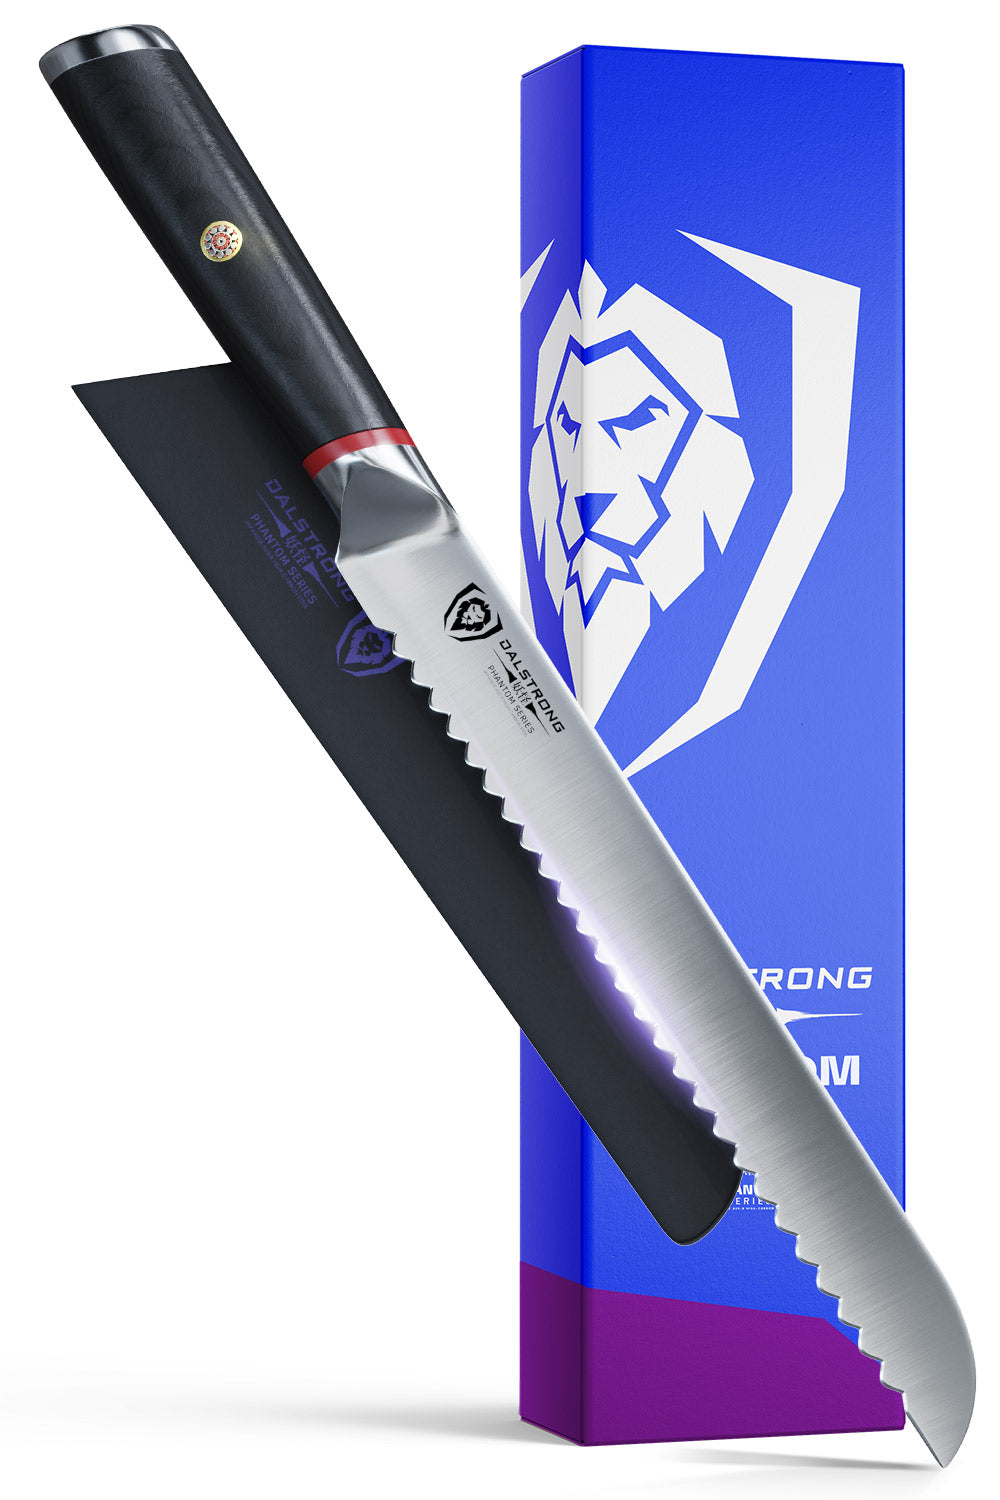 Dalstrong phantom series 9 inch serrated bread knife with pakka wood handle in front of it's premium packaging.